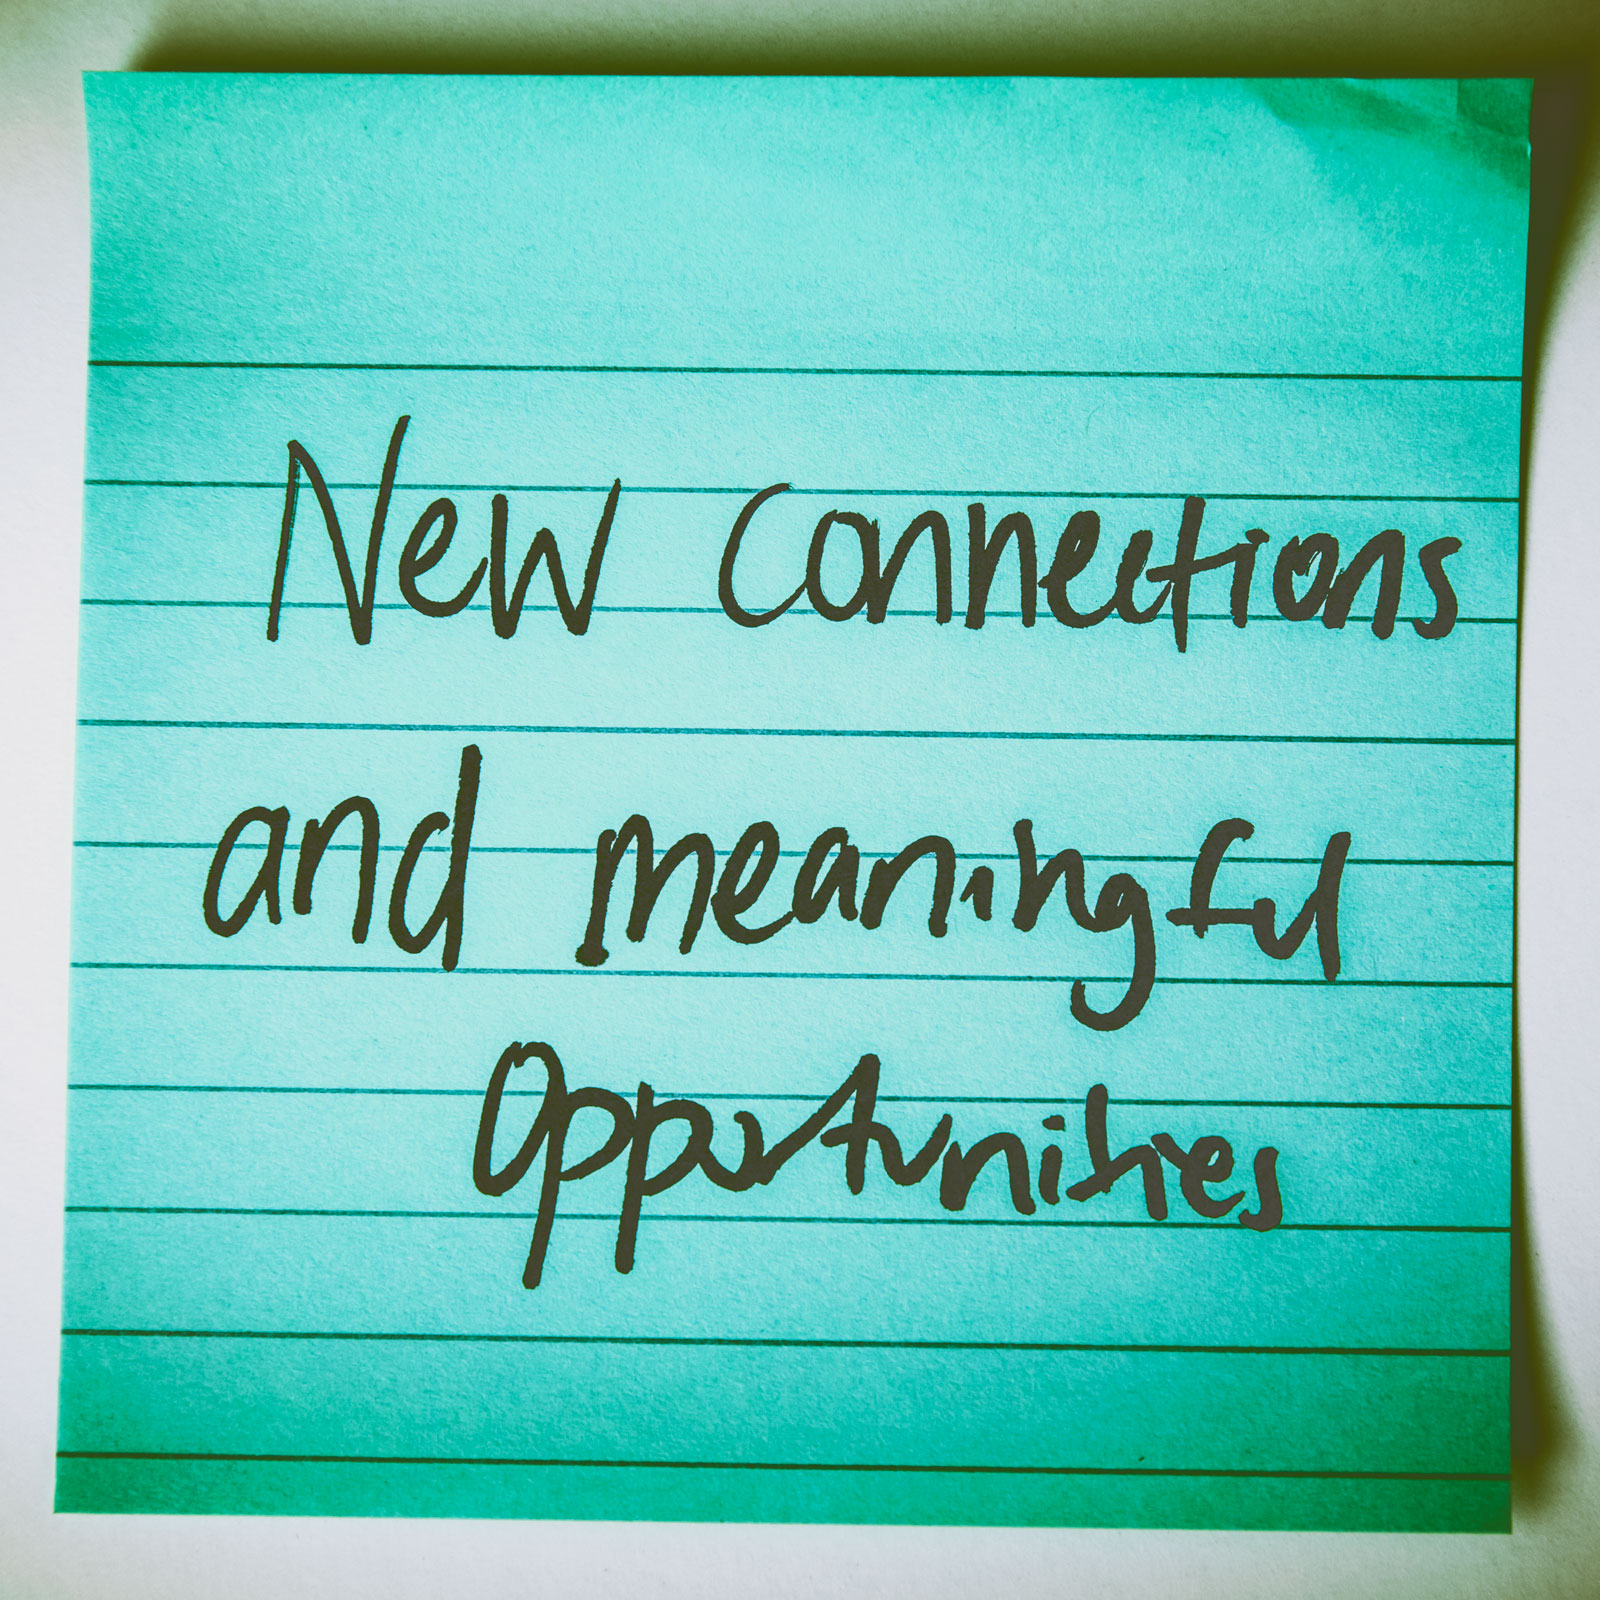 New connections and meaningful opportunities